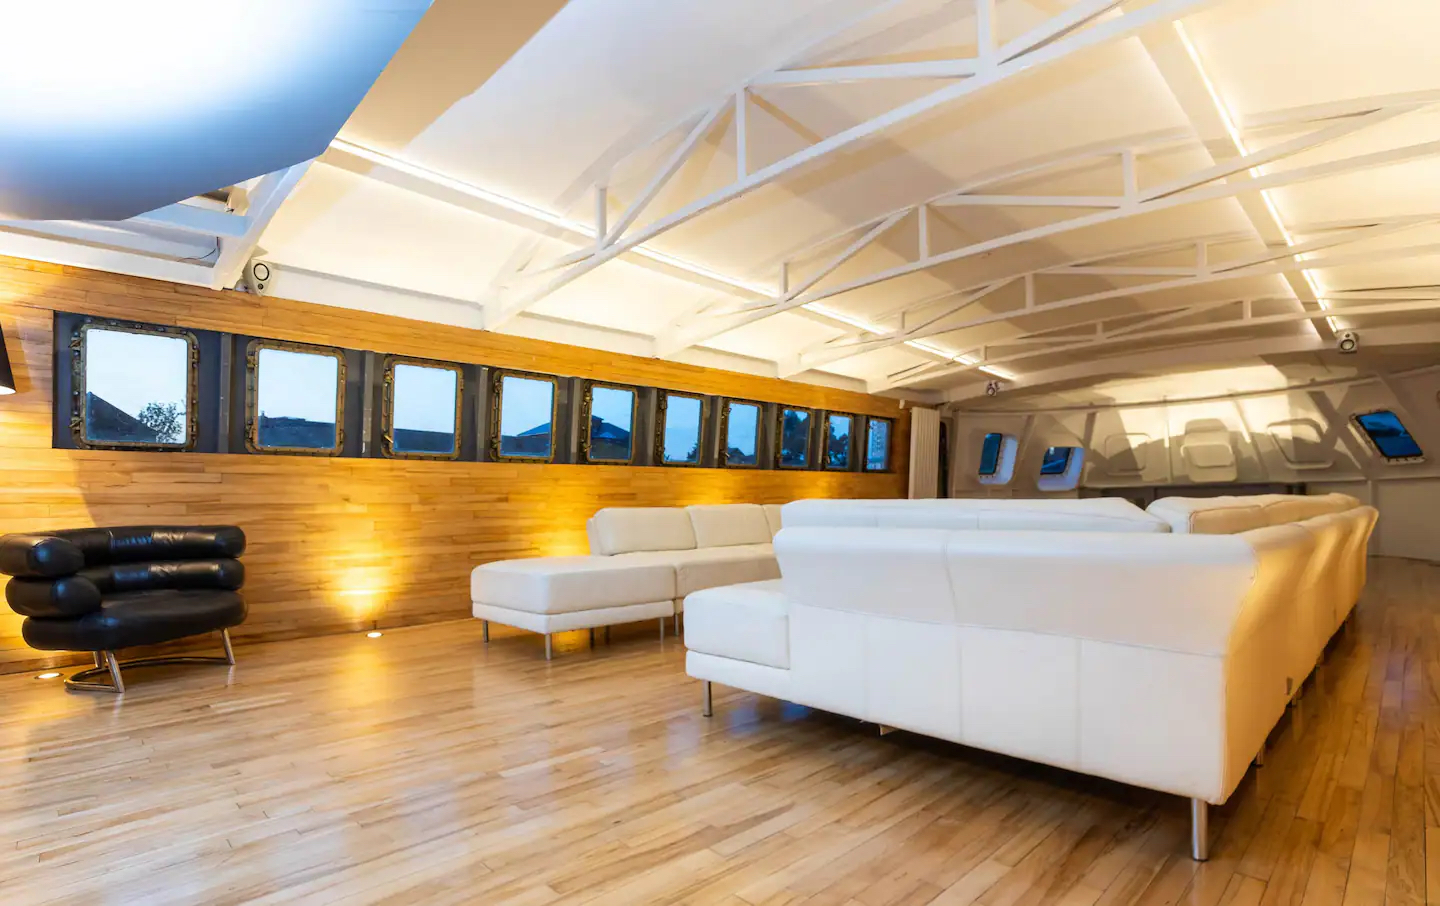 This luxury yacht is moored in Salford, Greater Manchester, as an Airbnb